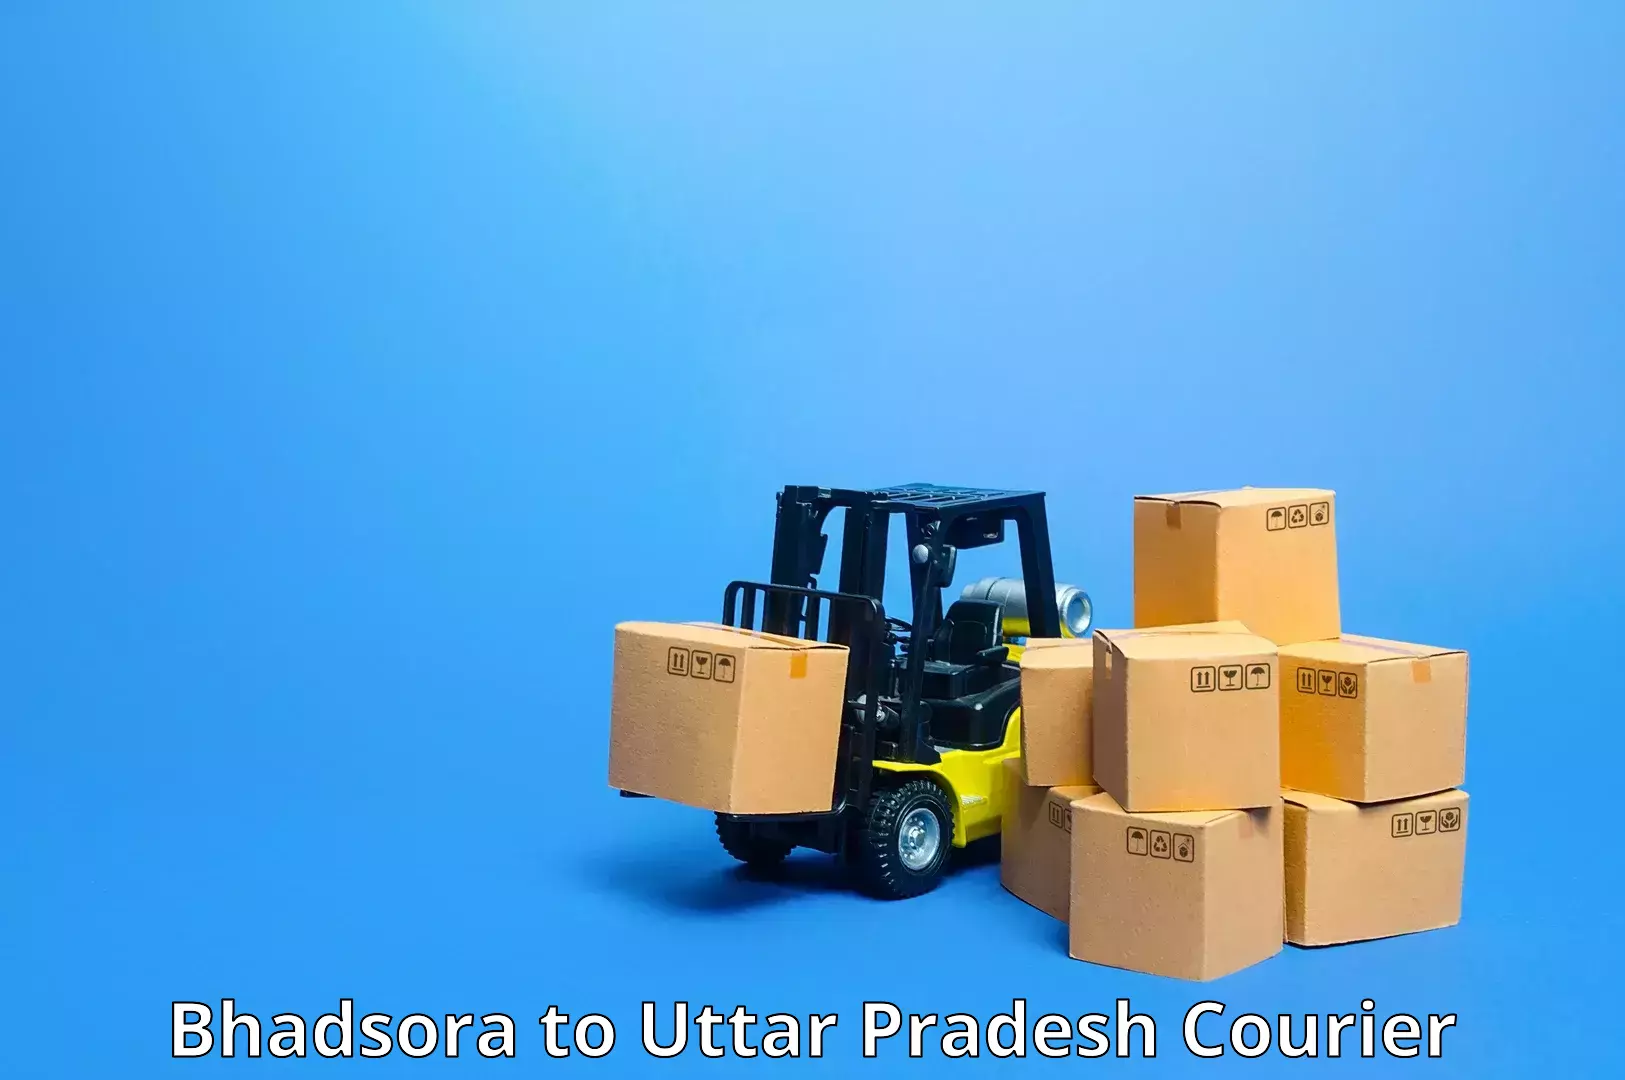 Flexible delivery schedules Bhadsora to Utraula